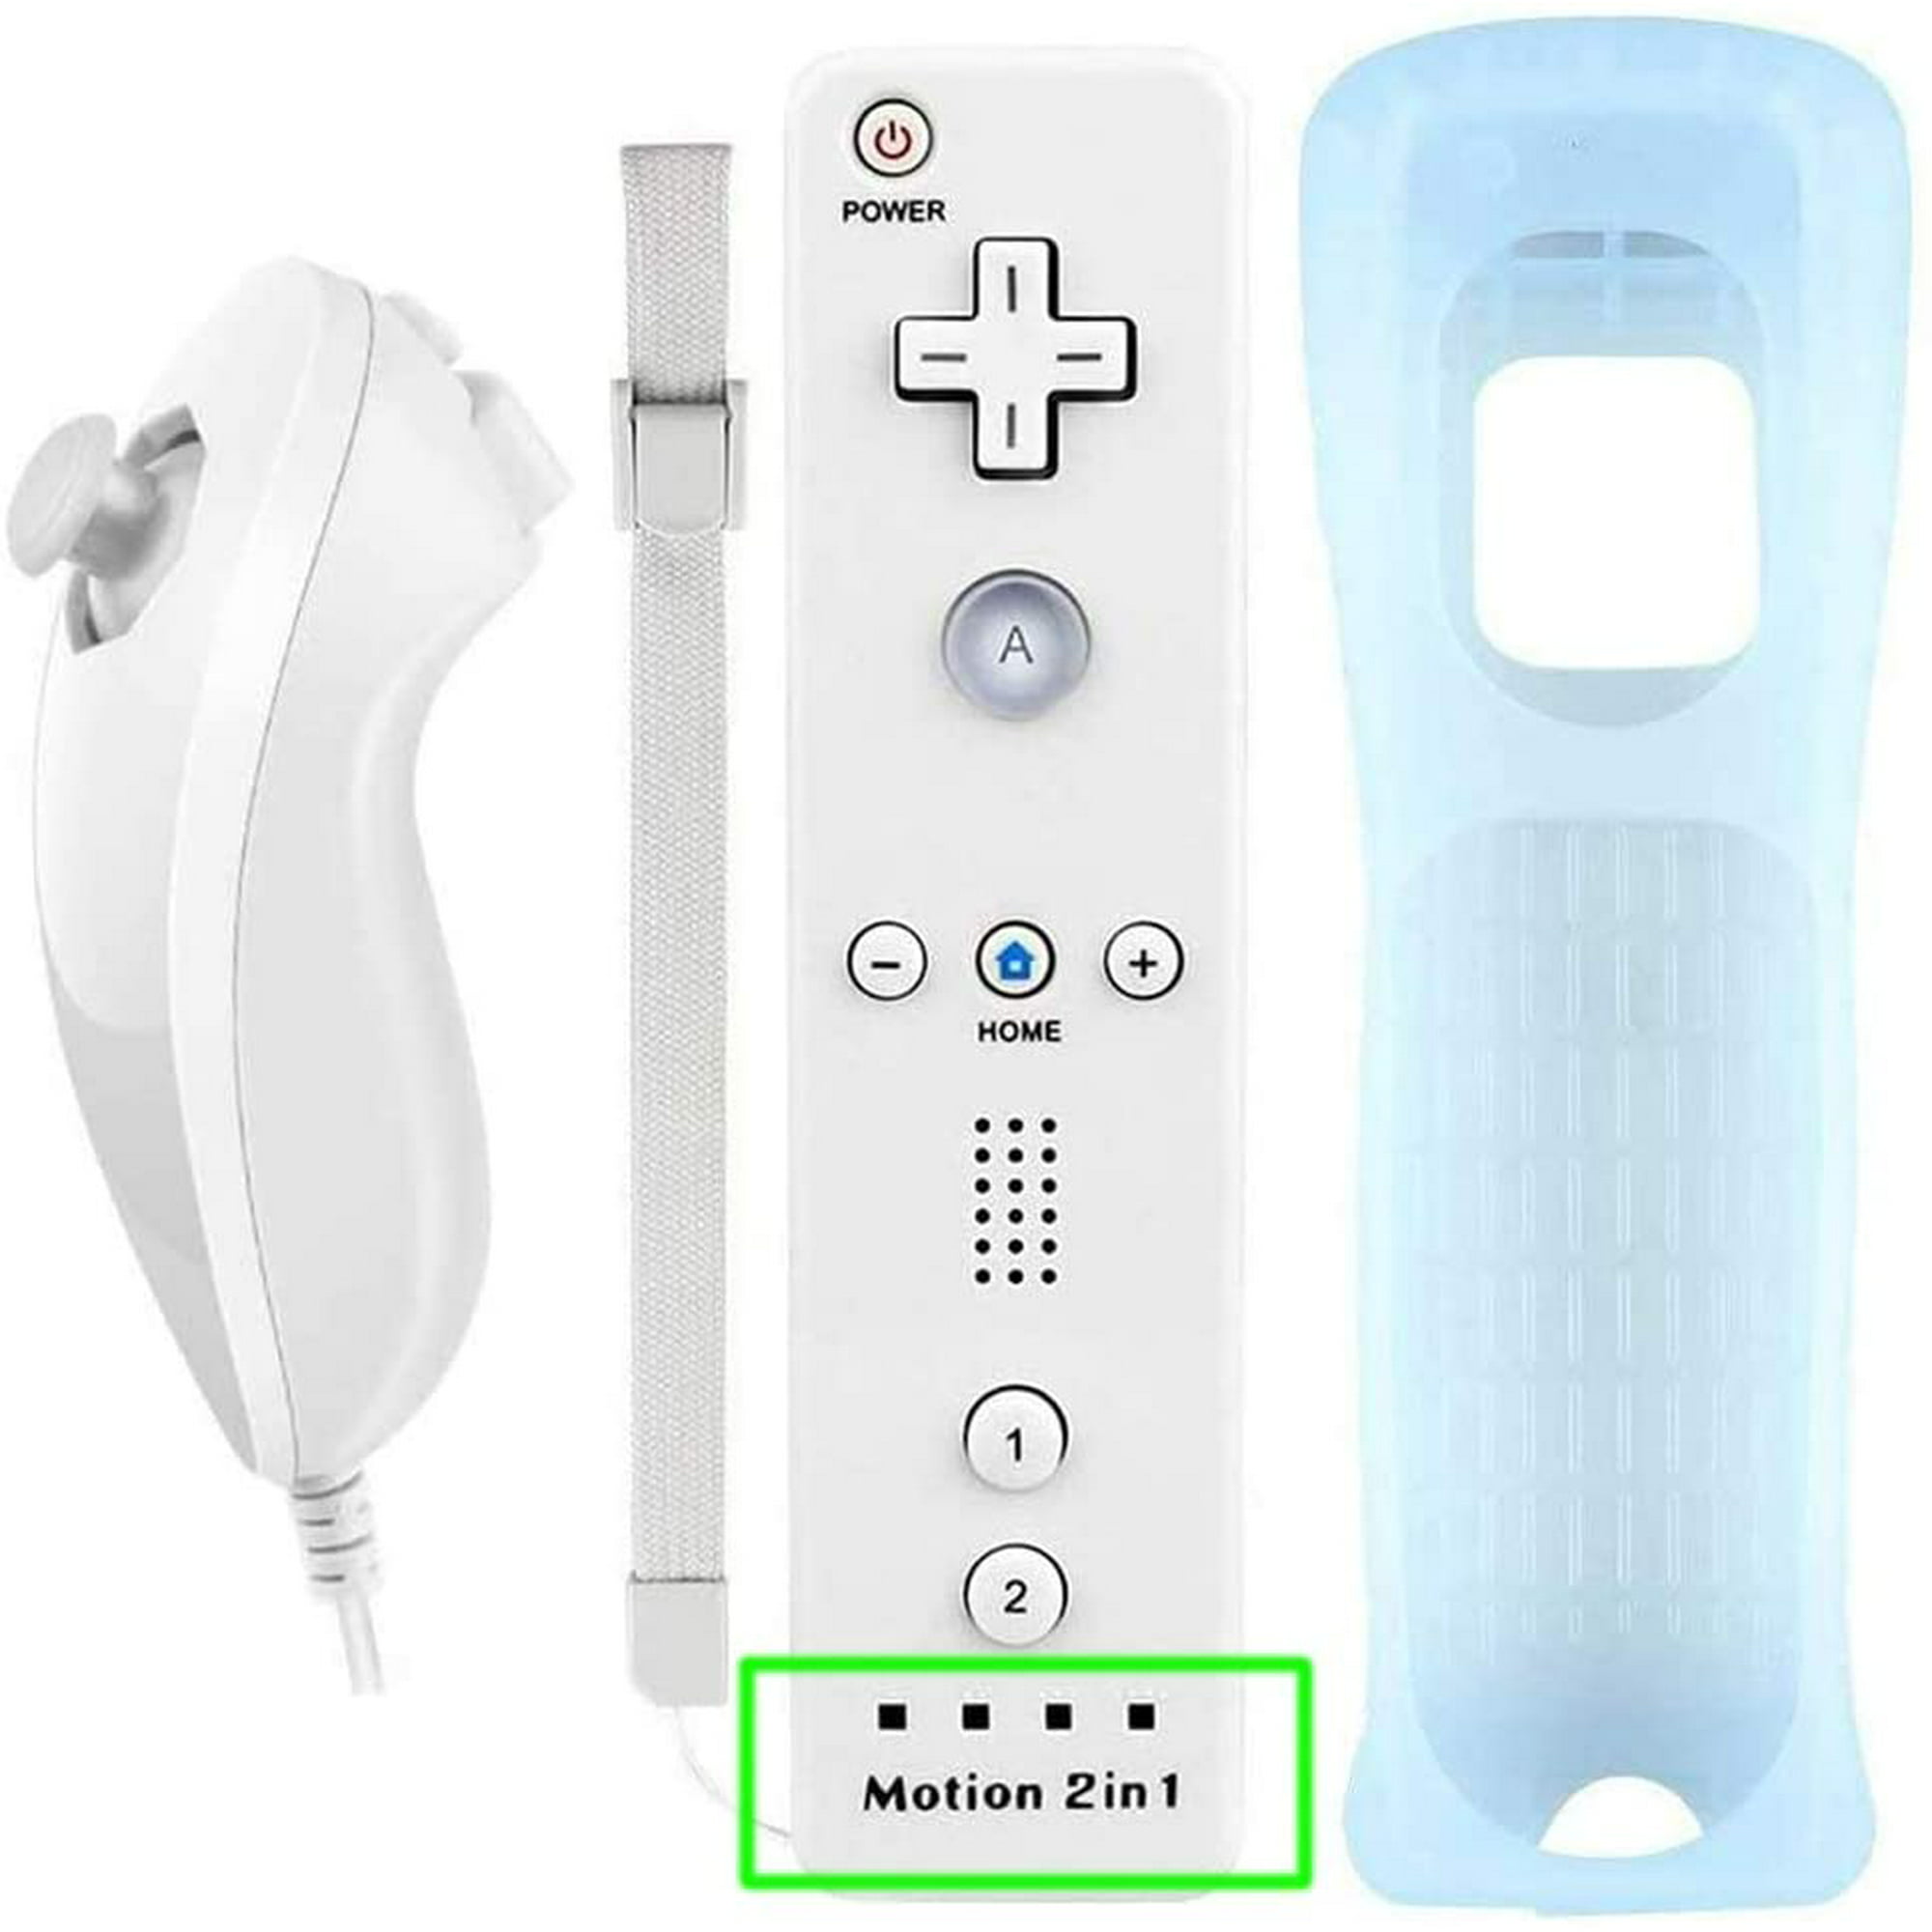 Wii Motion Plus. Wii Motion Plus inside. Remote Nunchuk Wii Block. Remote Nunchuk Wii Blфck.